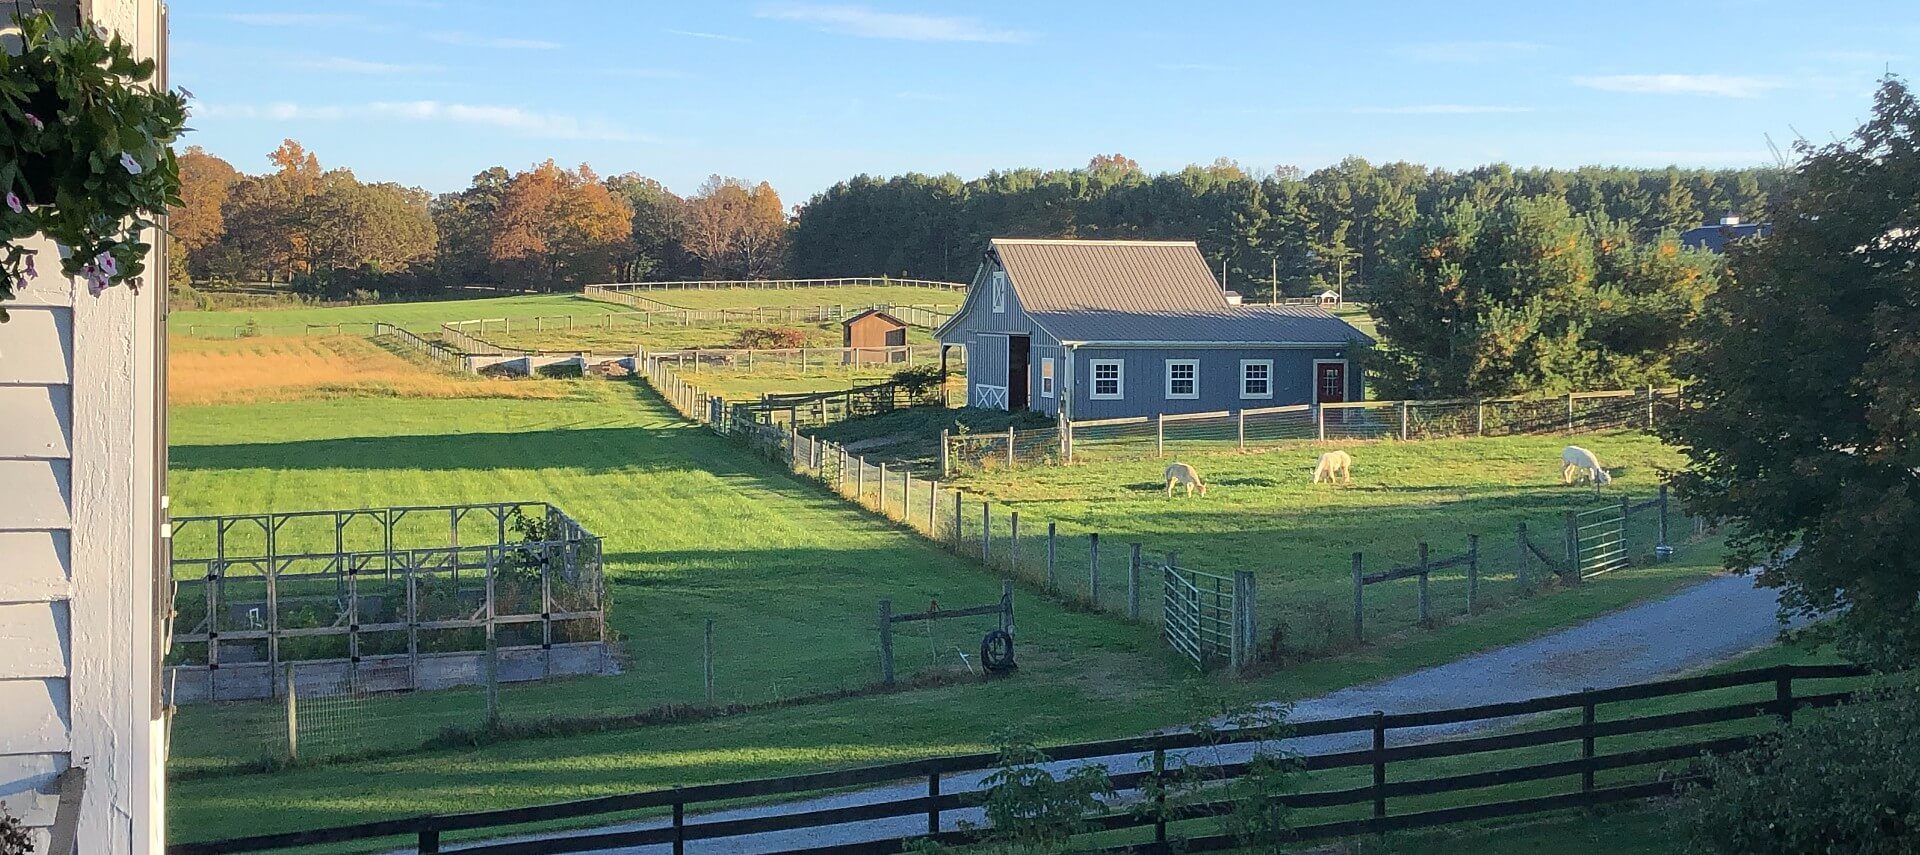 Large farm with blue barn and fenced fields, one holding three alpacas